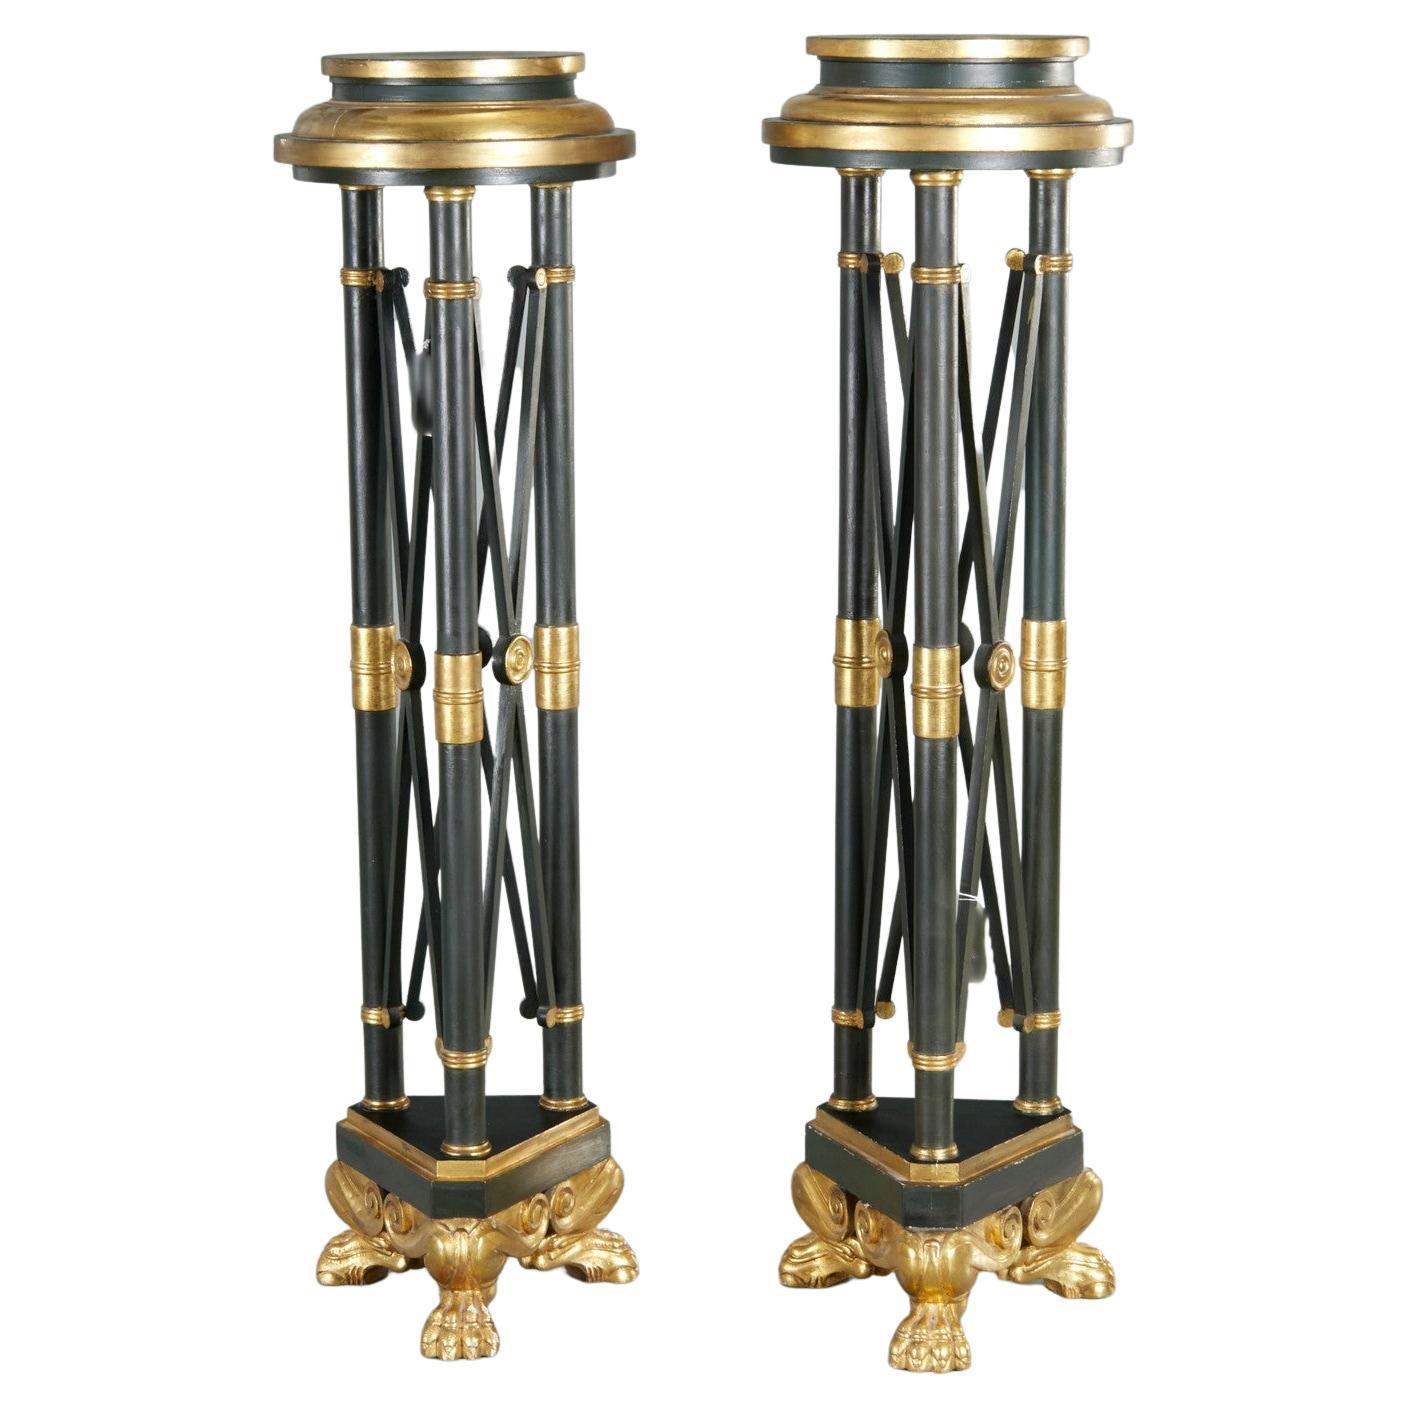 Vintage Empire Style Ebonised and Giltwood Torchiere Pedestals, a Pair